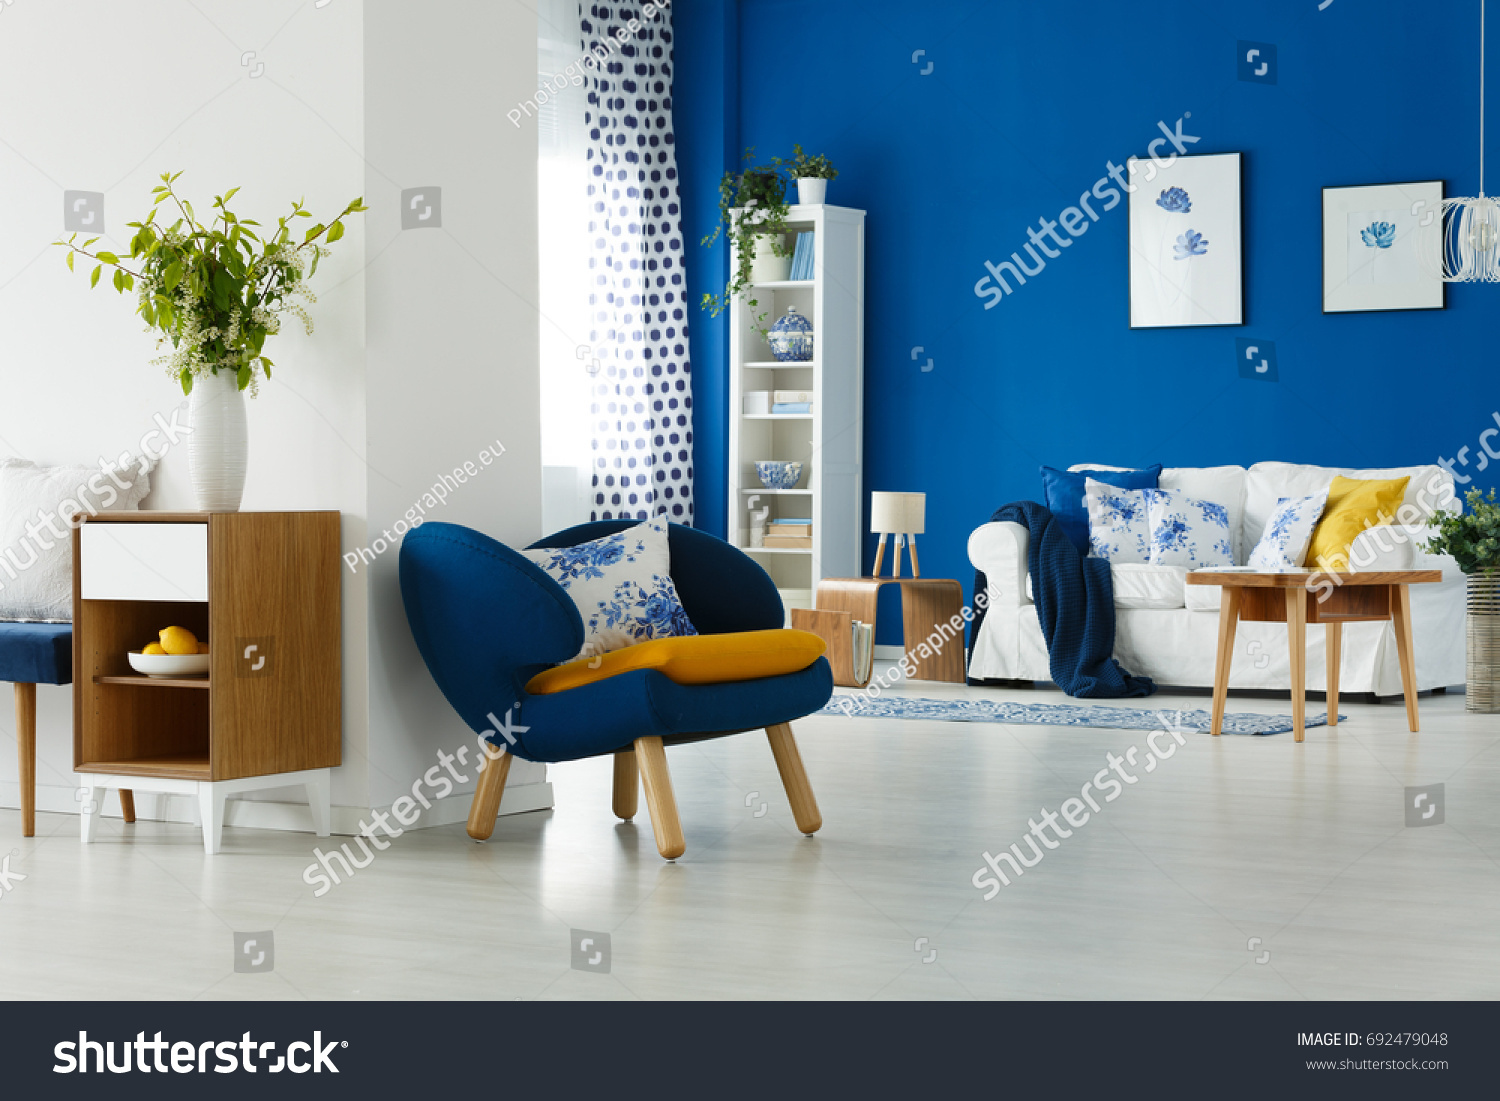 Blue armchair with mustard pillow by the white wall in lounge #692479048